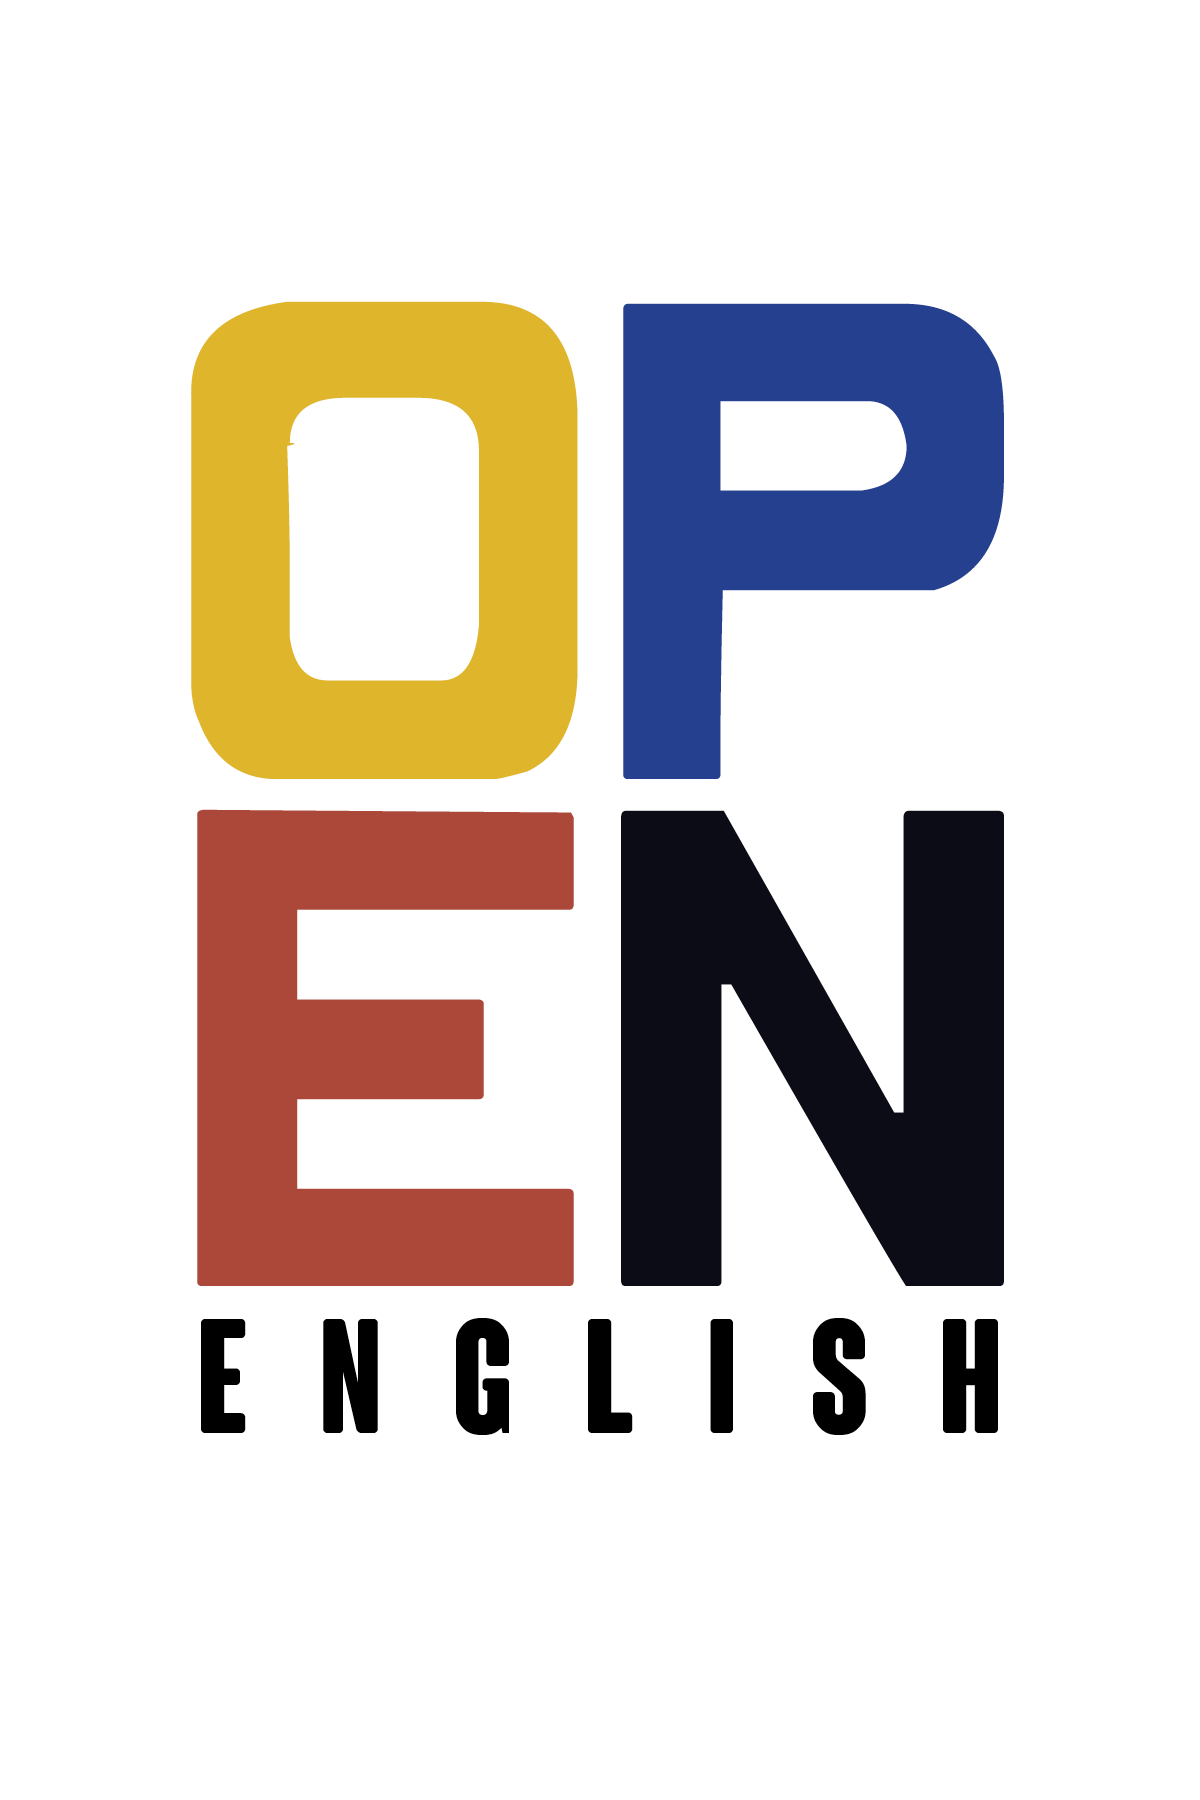 Open English - Open English added a new photo.